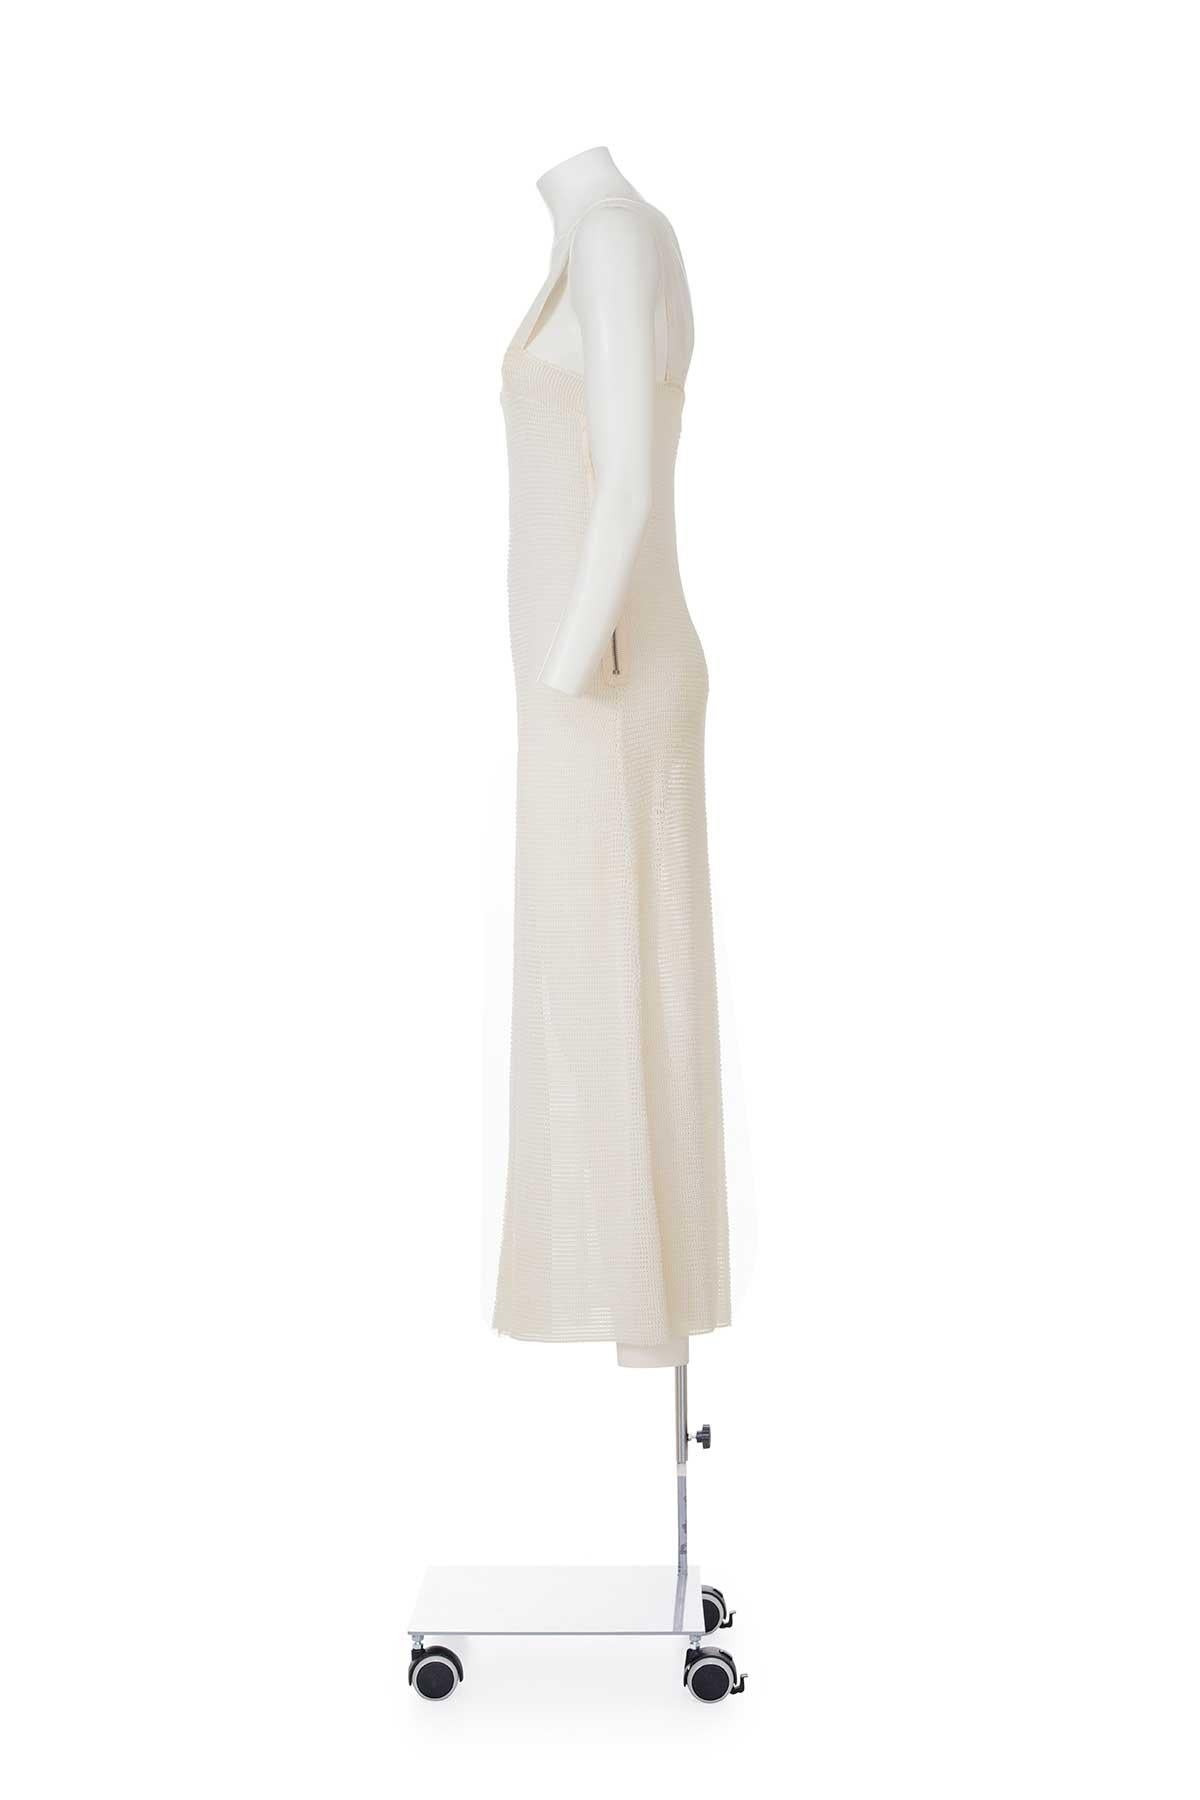 90's rare early collections' slip dress in waved fabric by Maison Martin Margiela.
Elasticated shoulder straps.
Side zipper.
The composition tag is missing, seems to be made of polyamide.